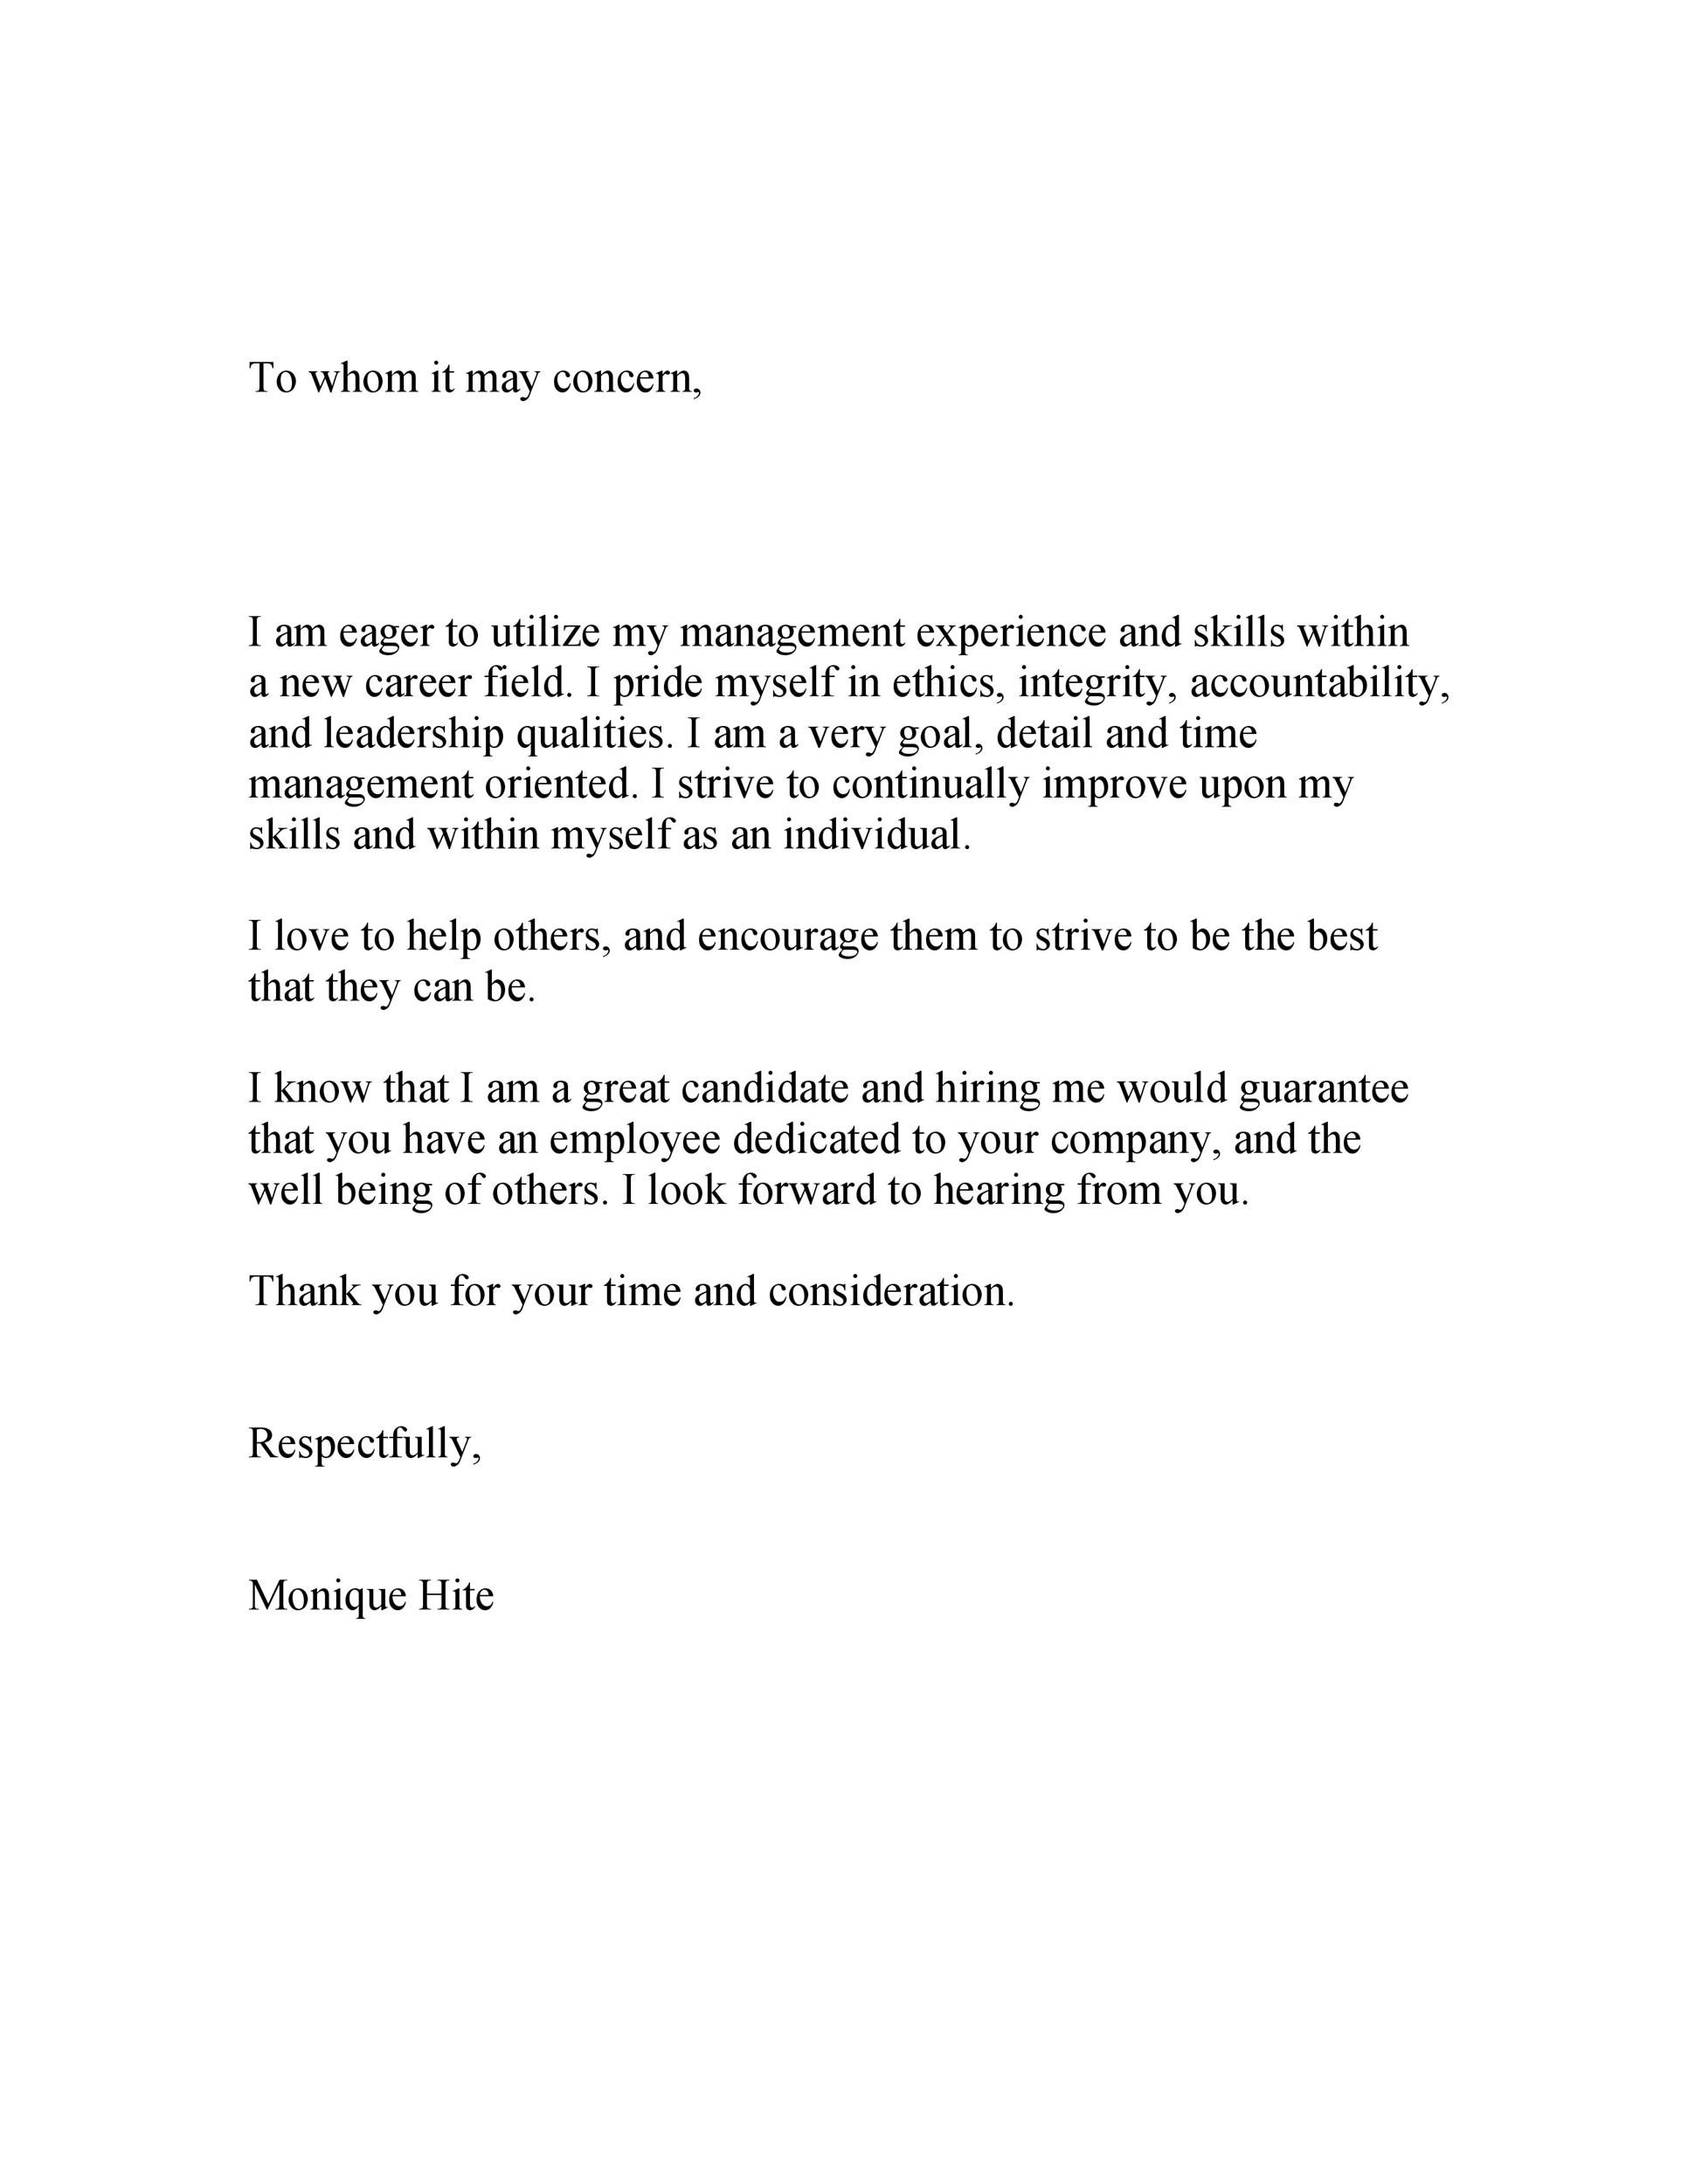 dear whom it may concern cover letter